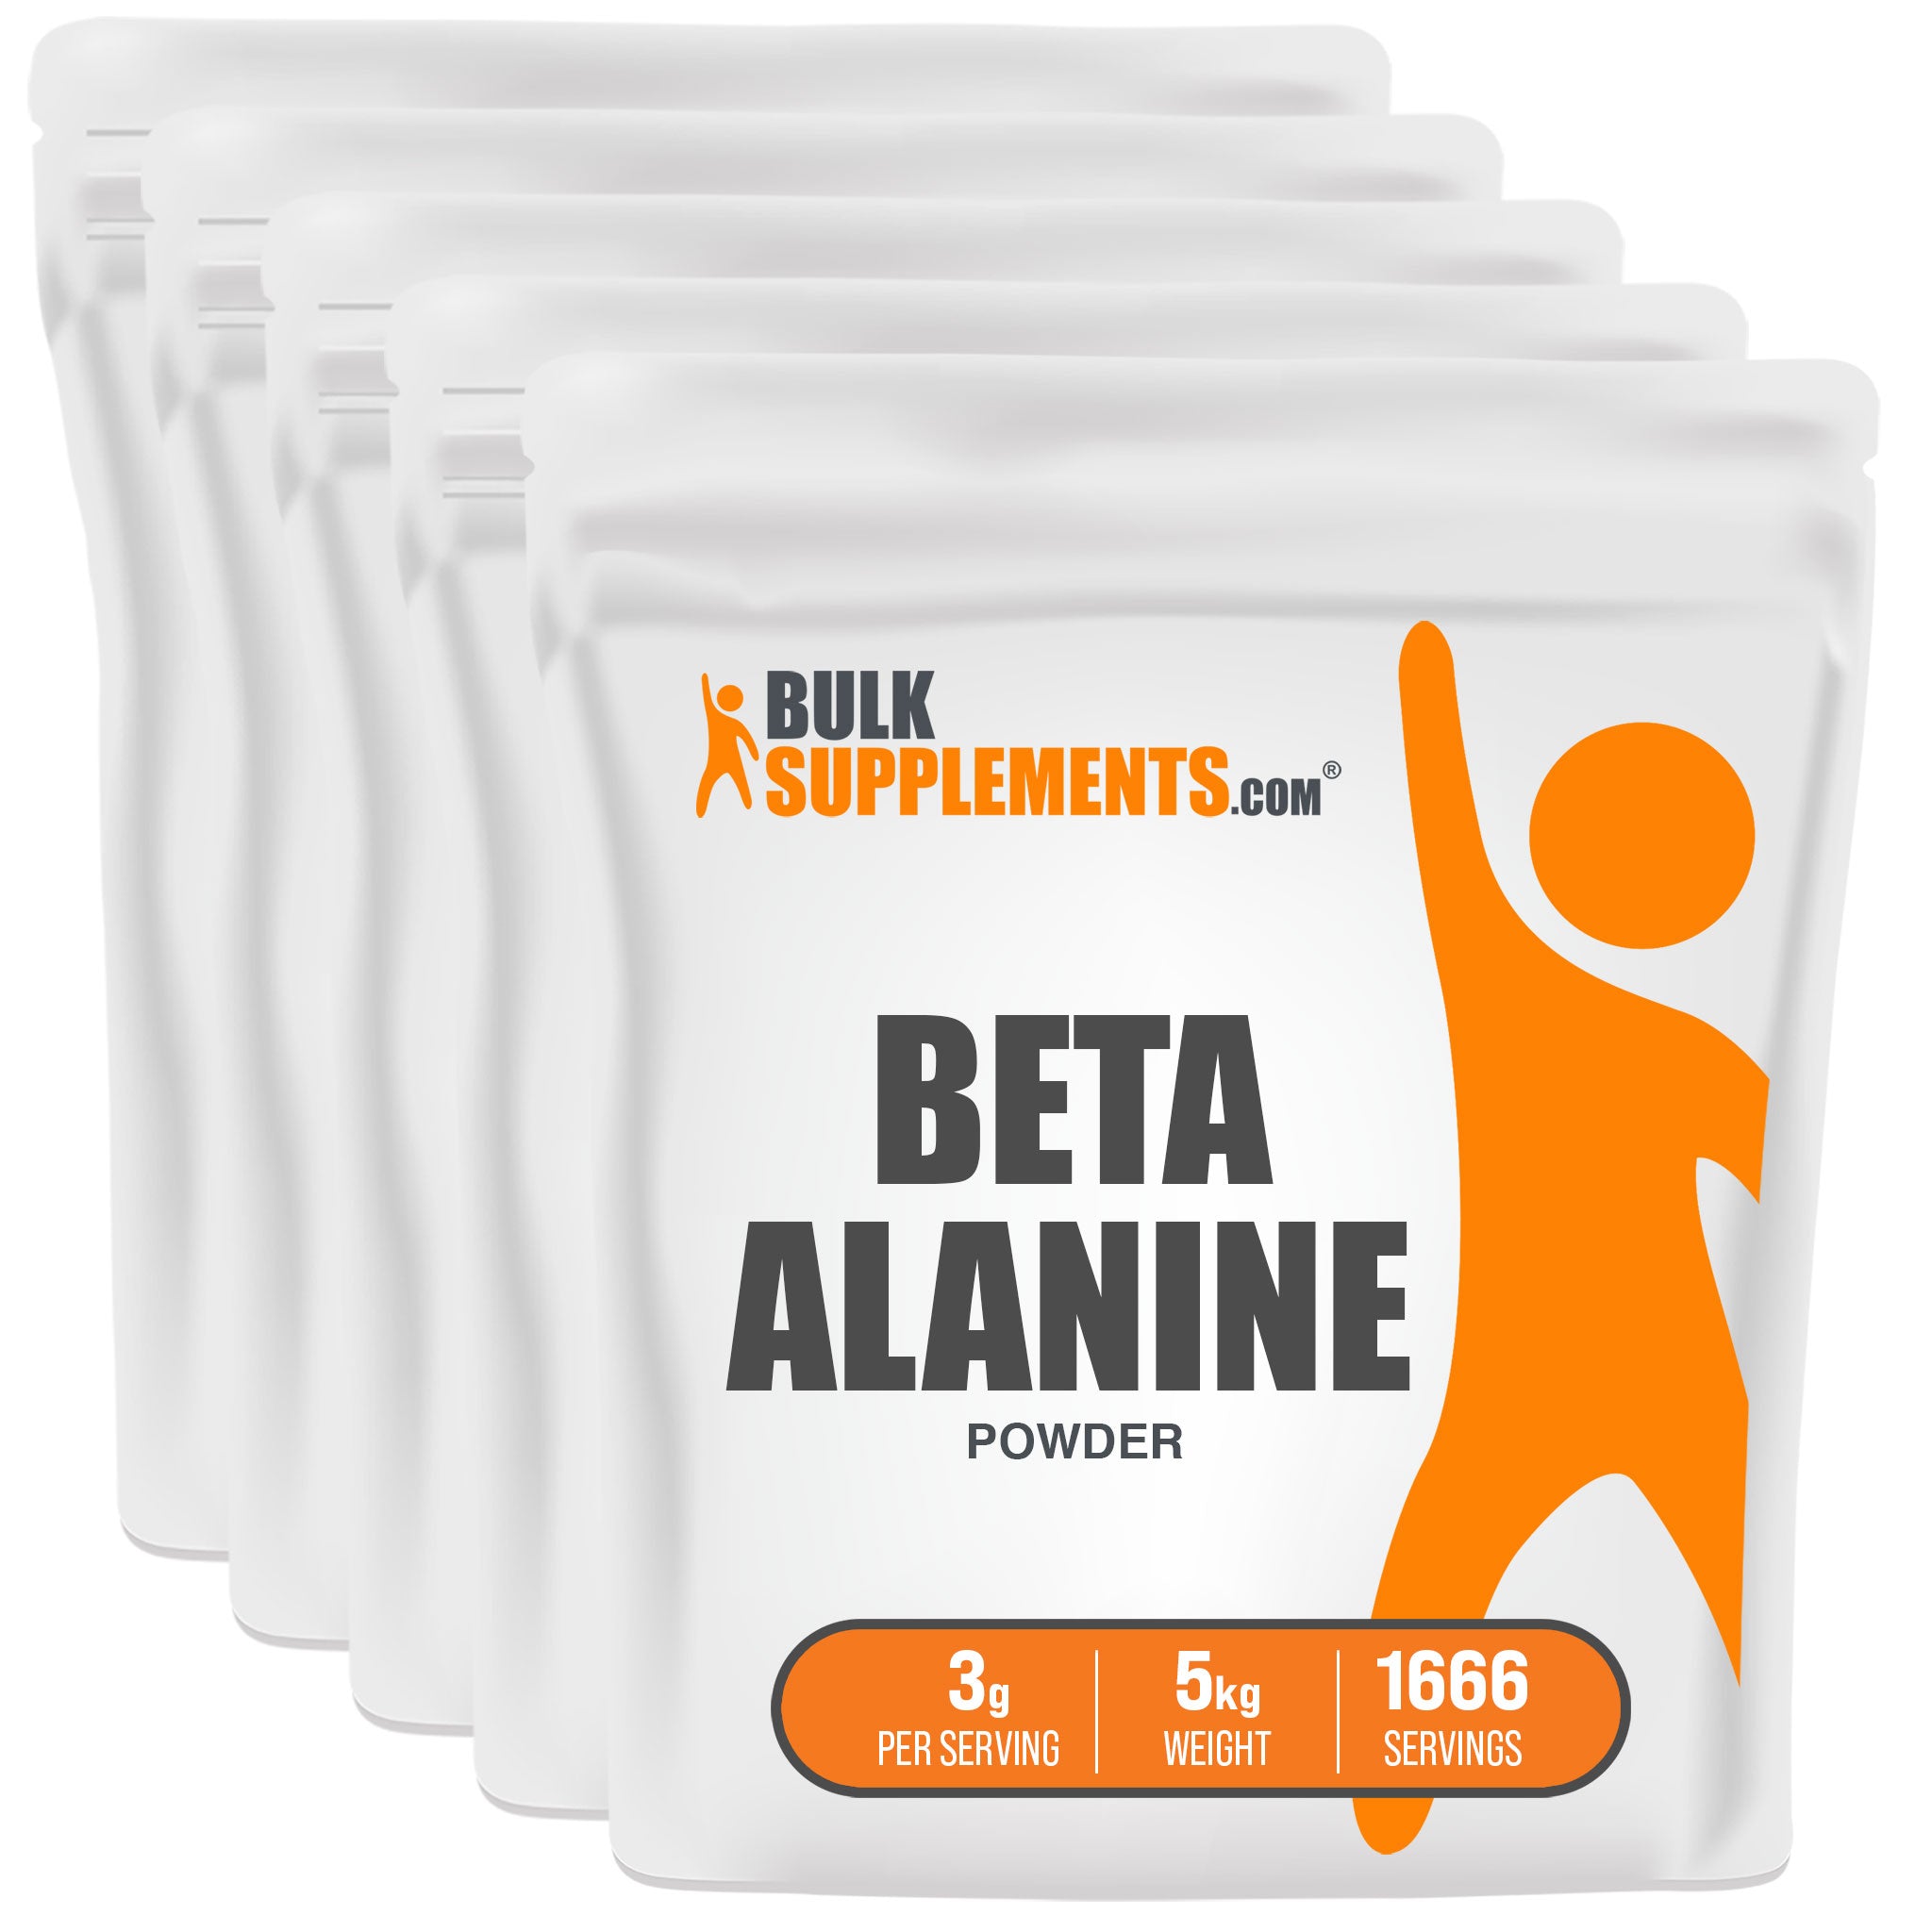 Beta Alanine Powder Bulk Pack of five 1kg Bags with a total of 1666 servings